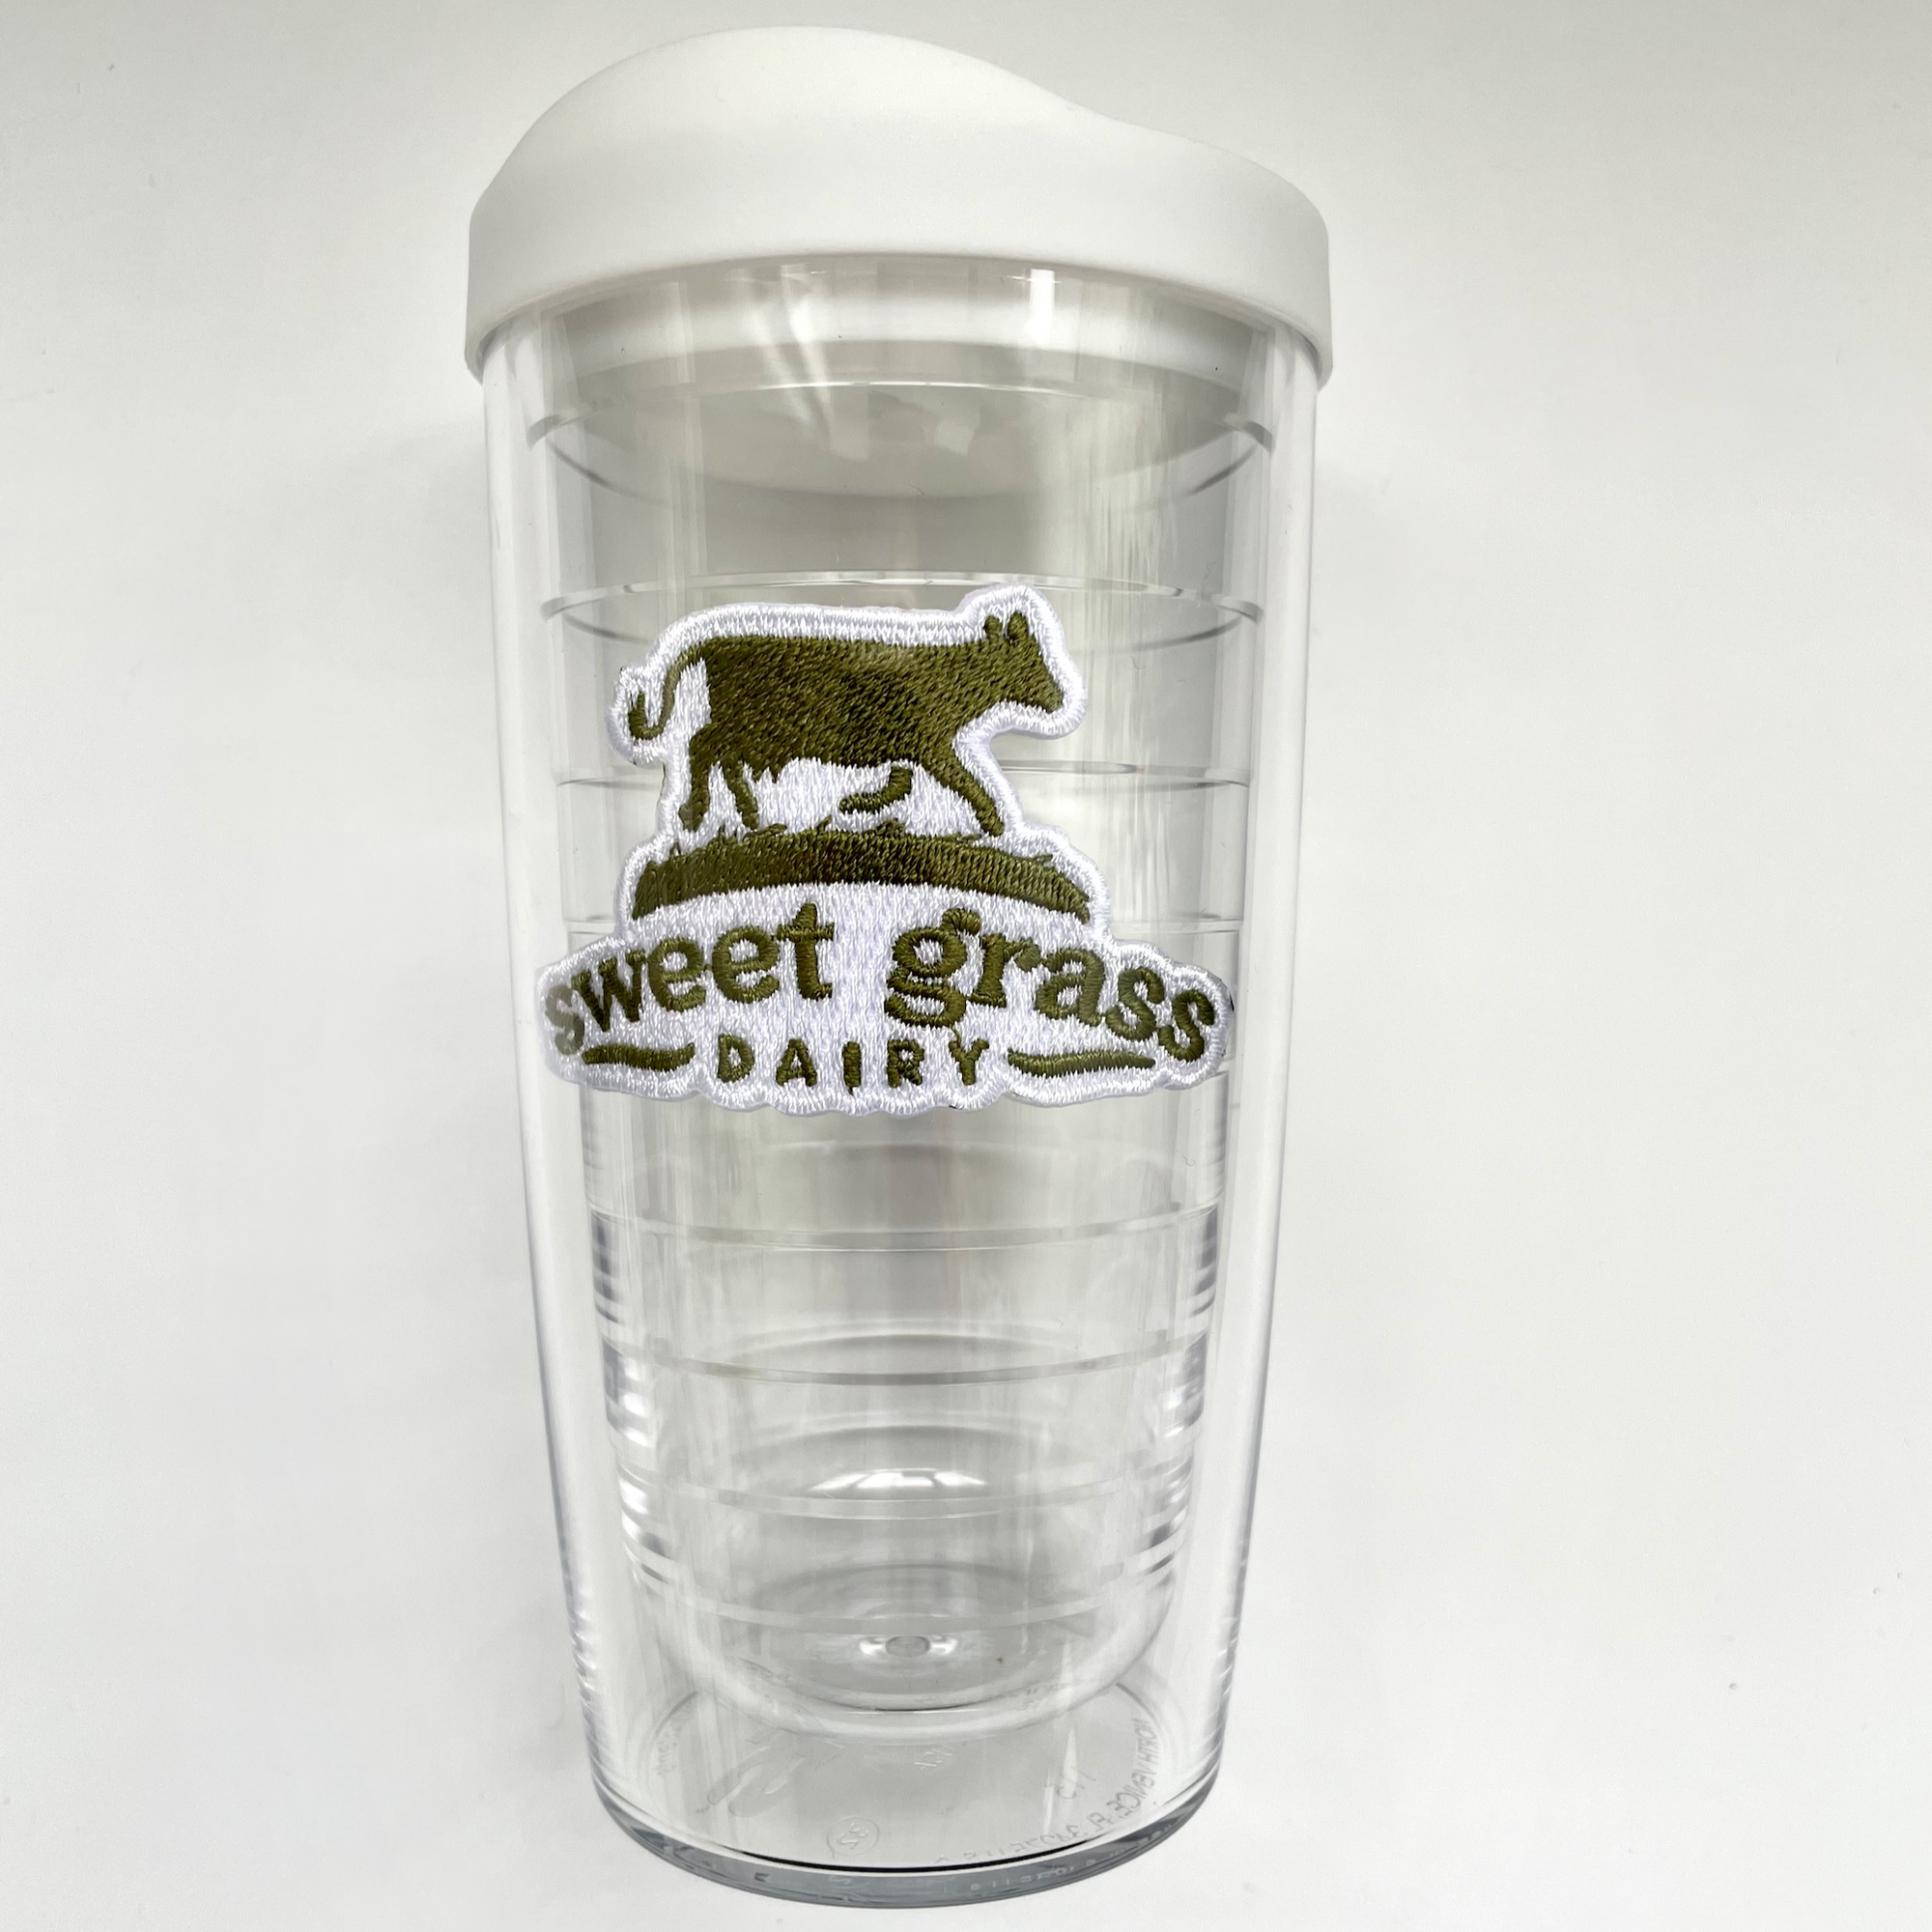 Tervis Tumbler with the Sweet Grass Dairy logo 